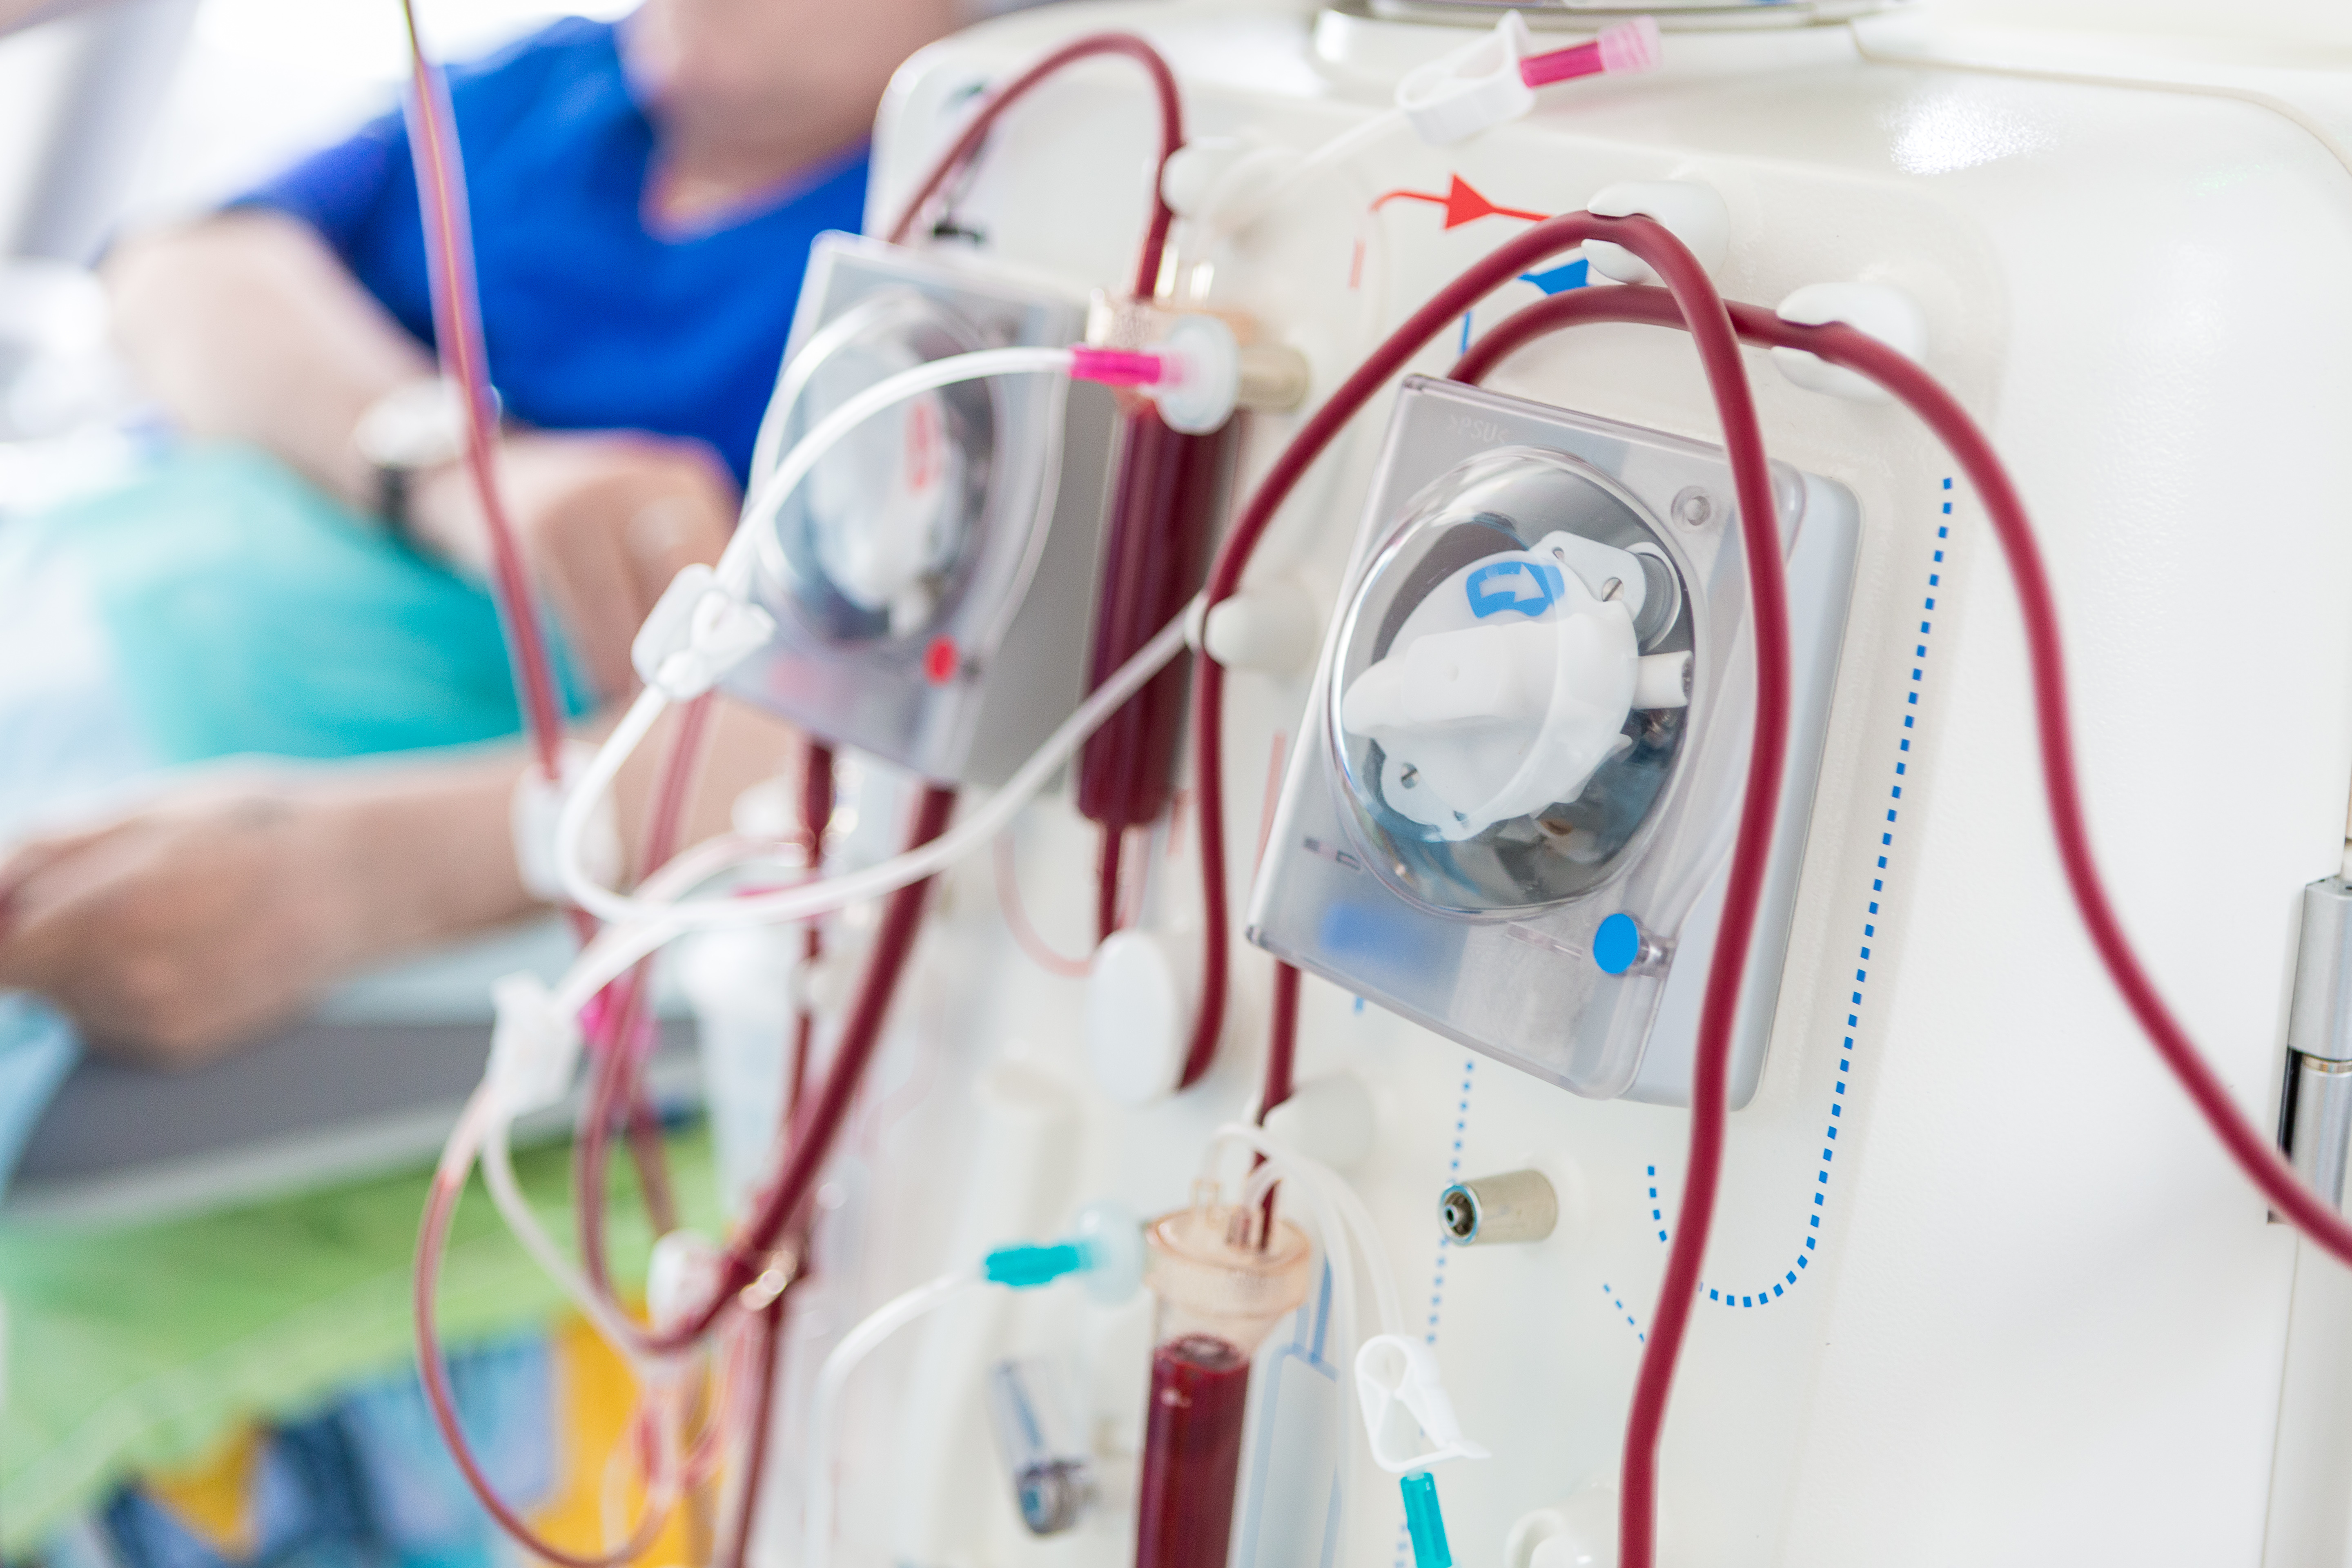 The front of a dialysis machine is seen in the foreground as it cycles the blood of a patient.